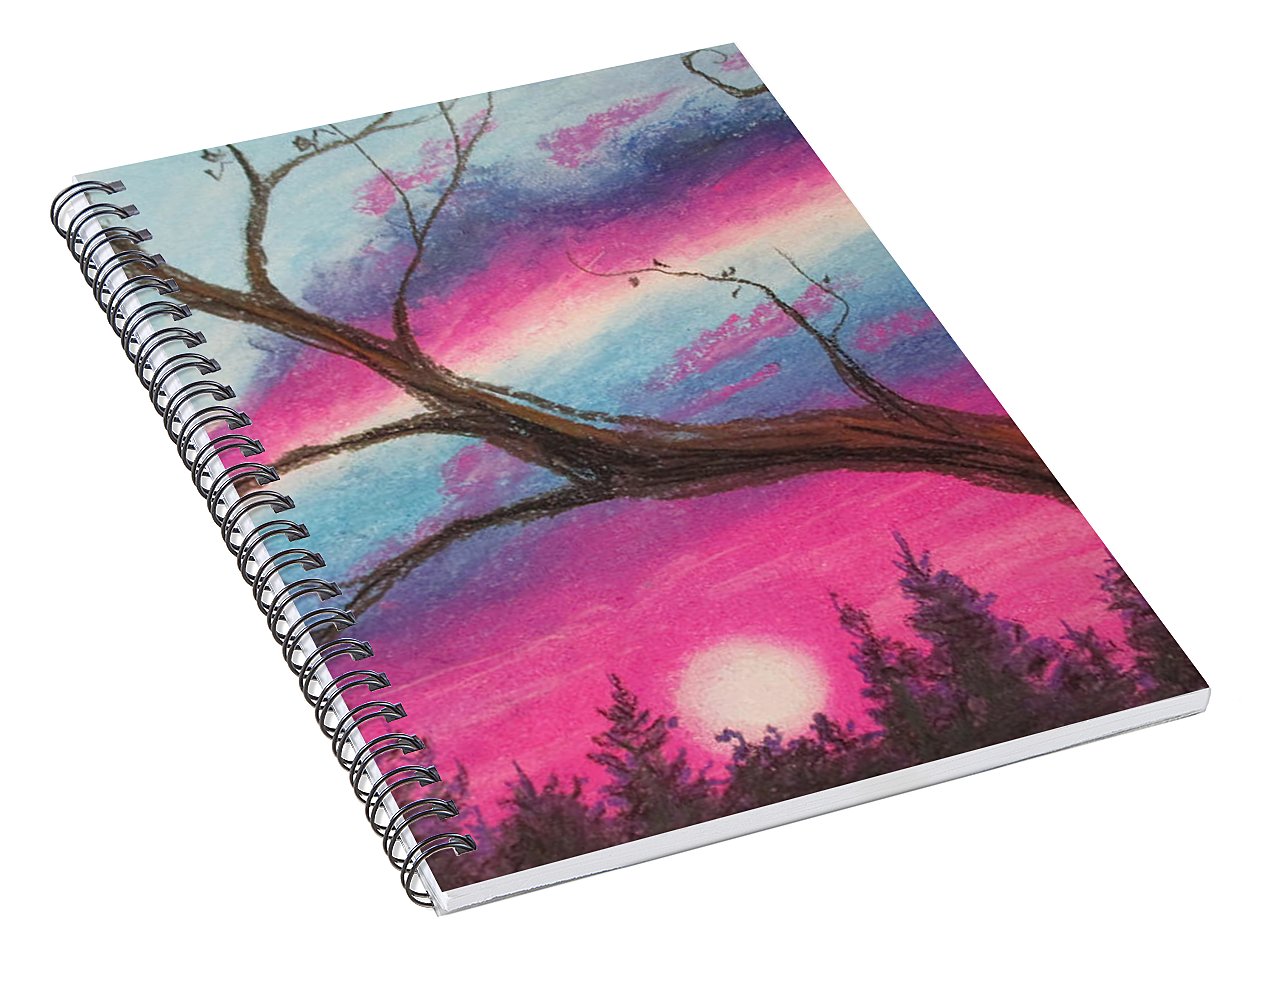 Sunsetting Tree - Spiral Notebook